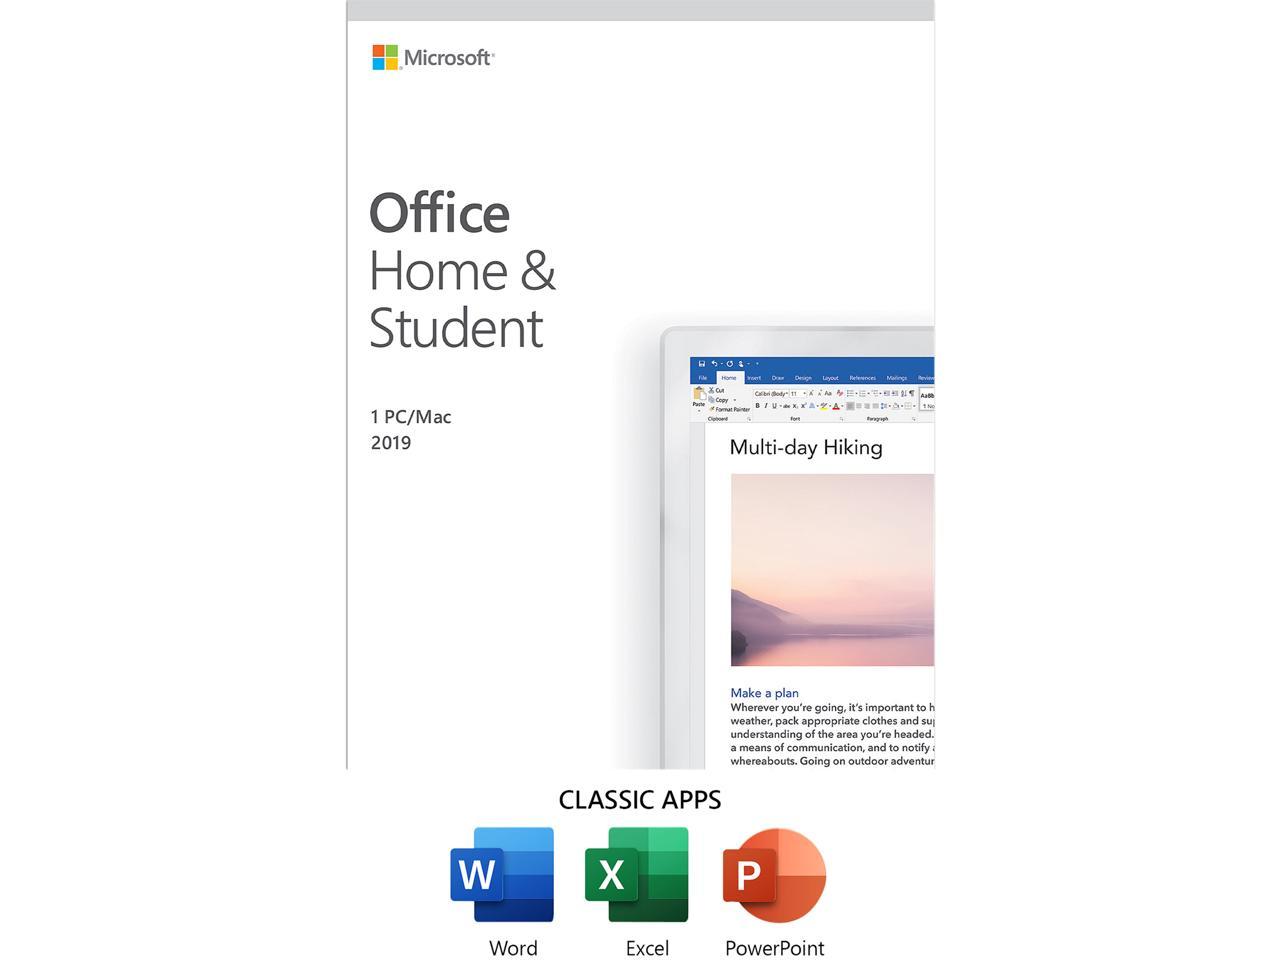 one time purchase microsoft office 365